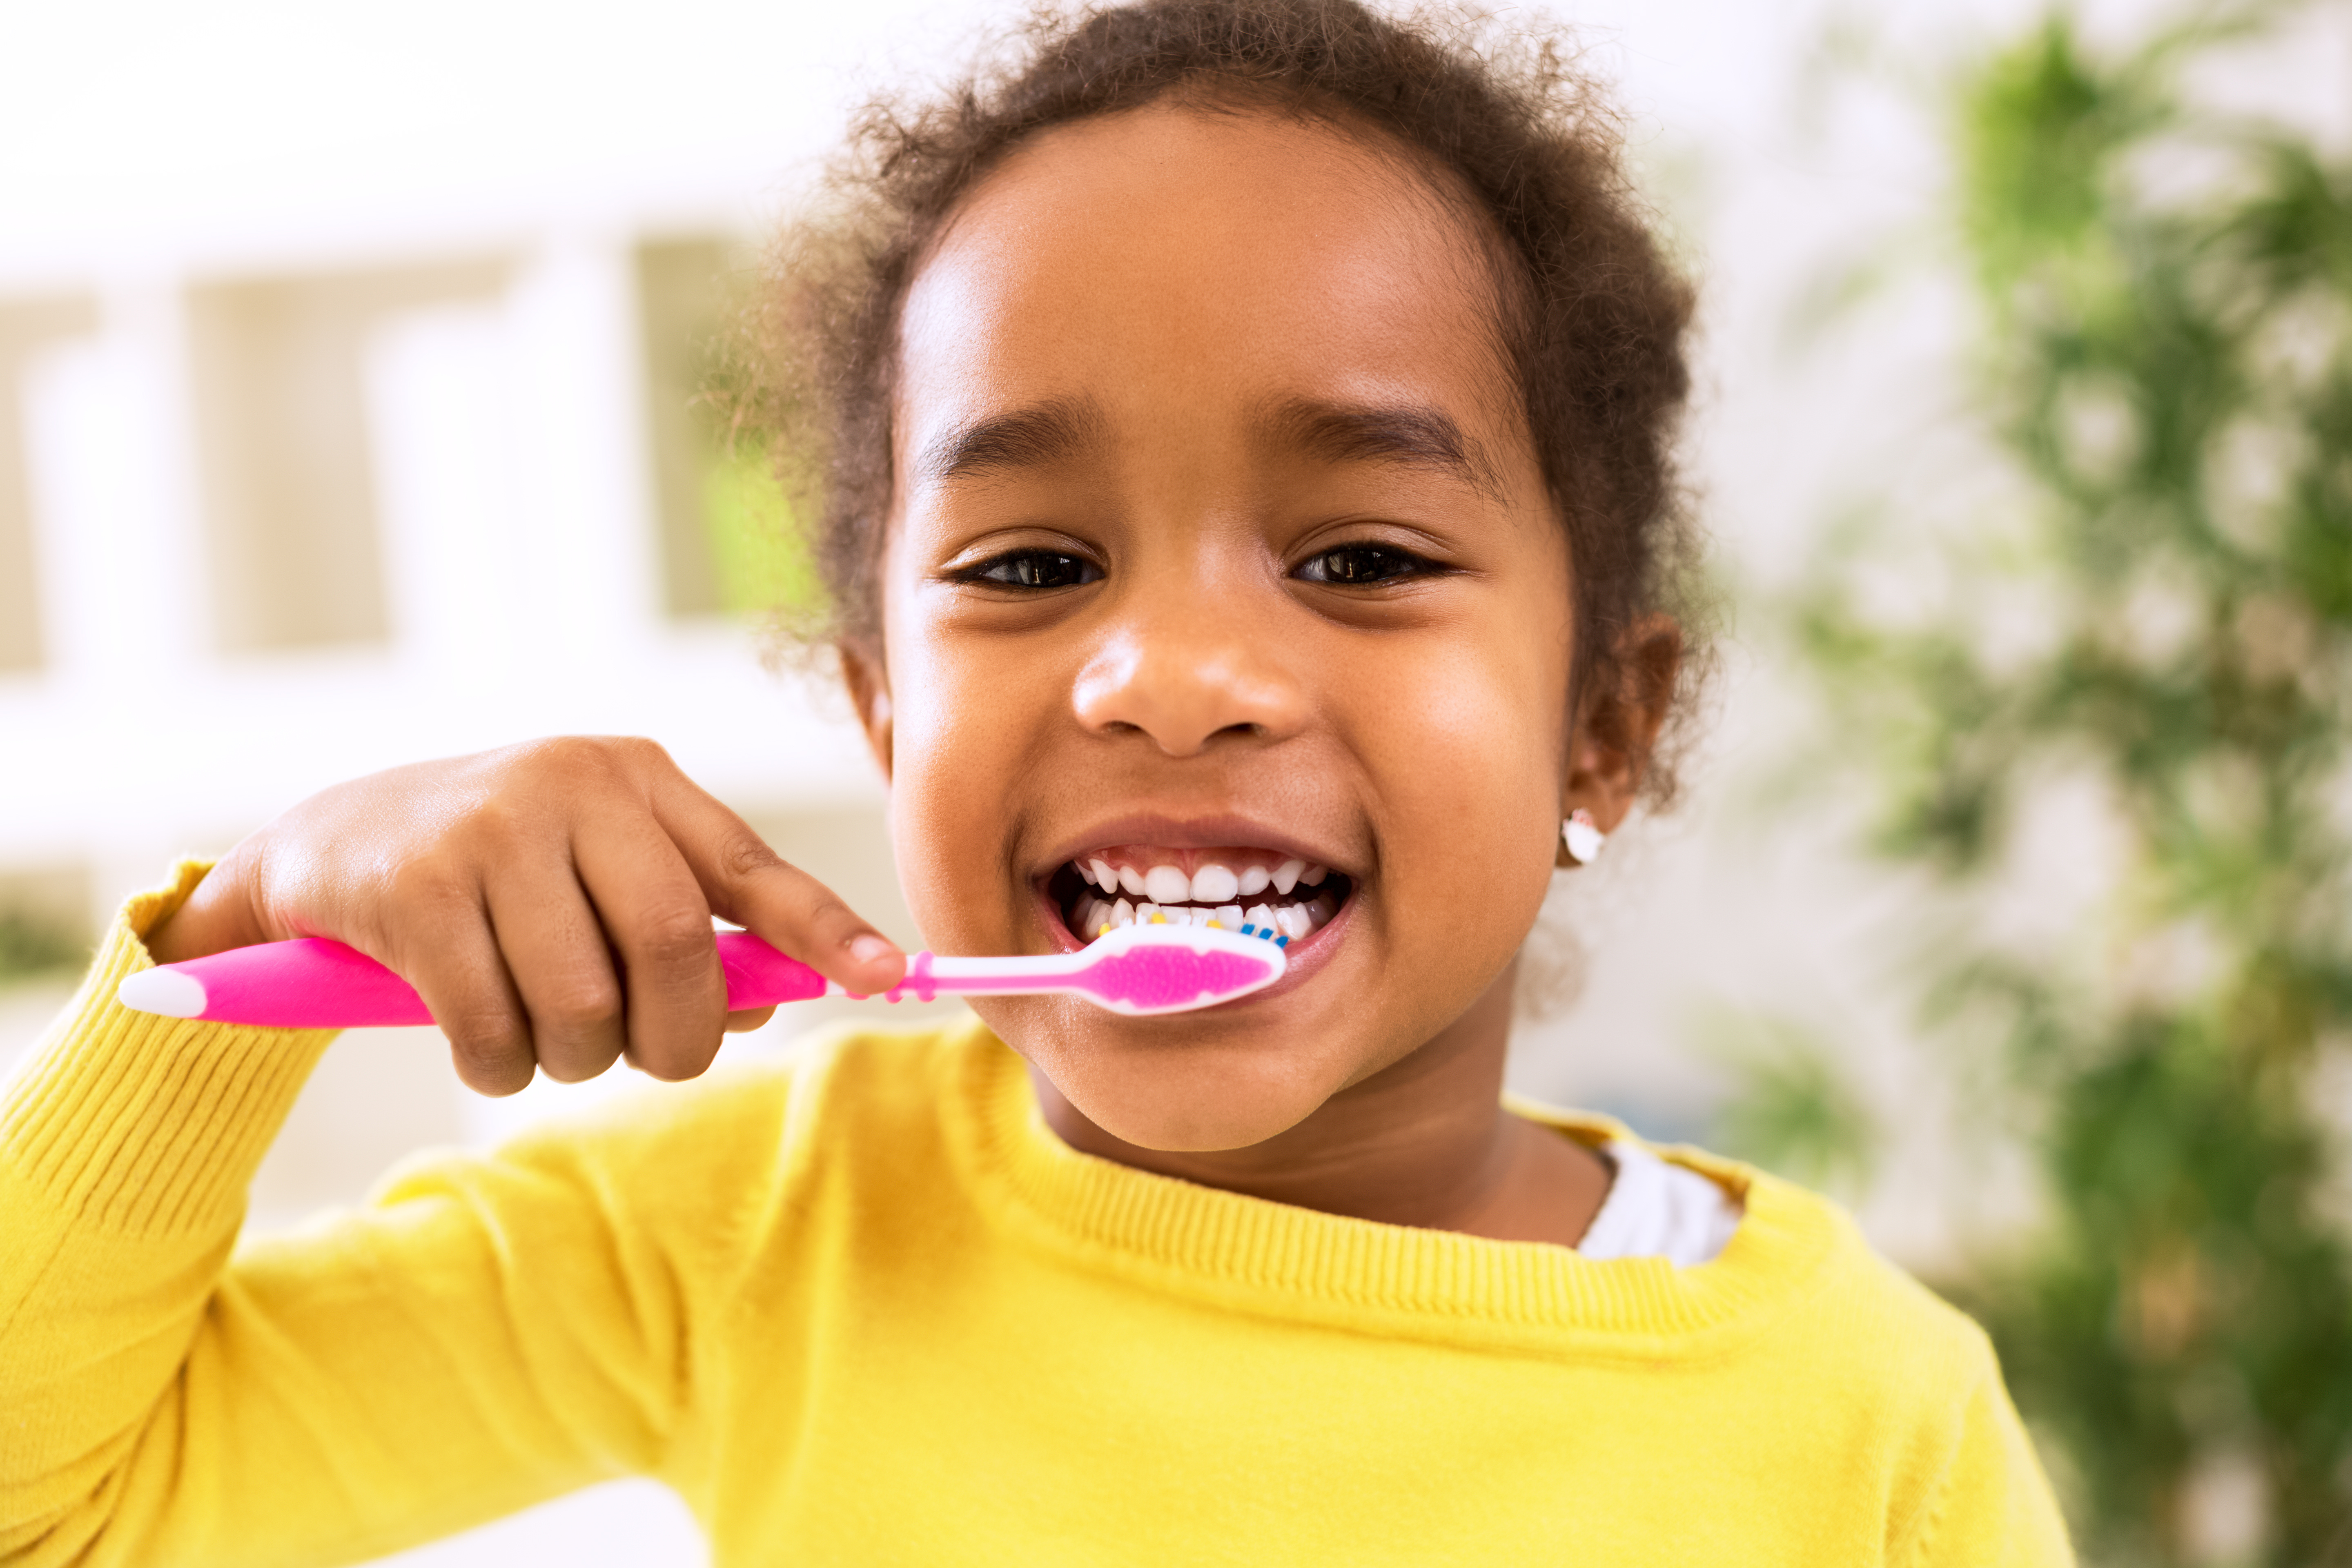 Child smiling and brushing their teeth